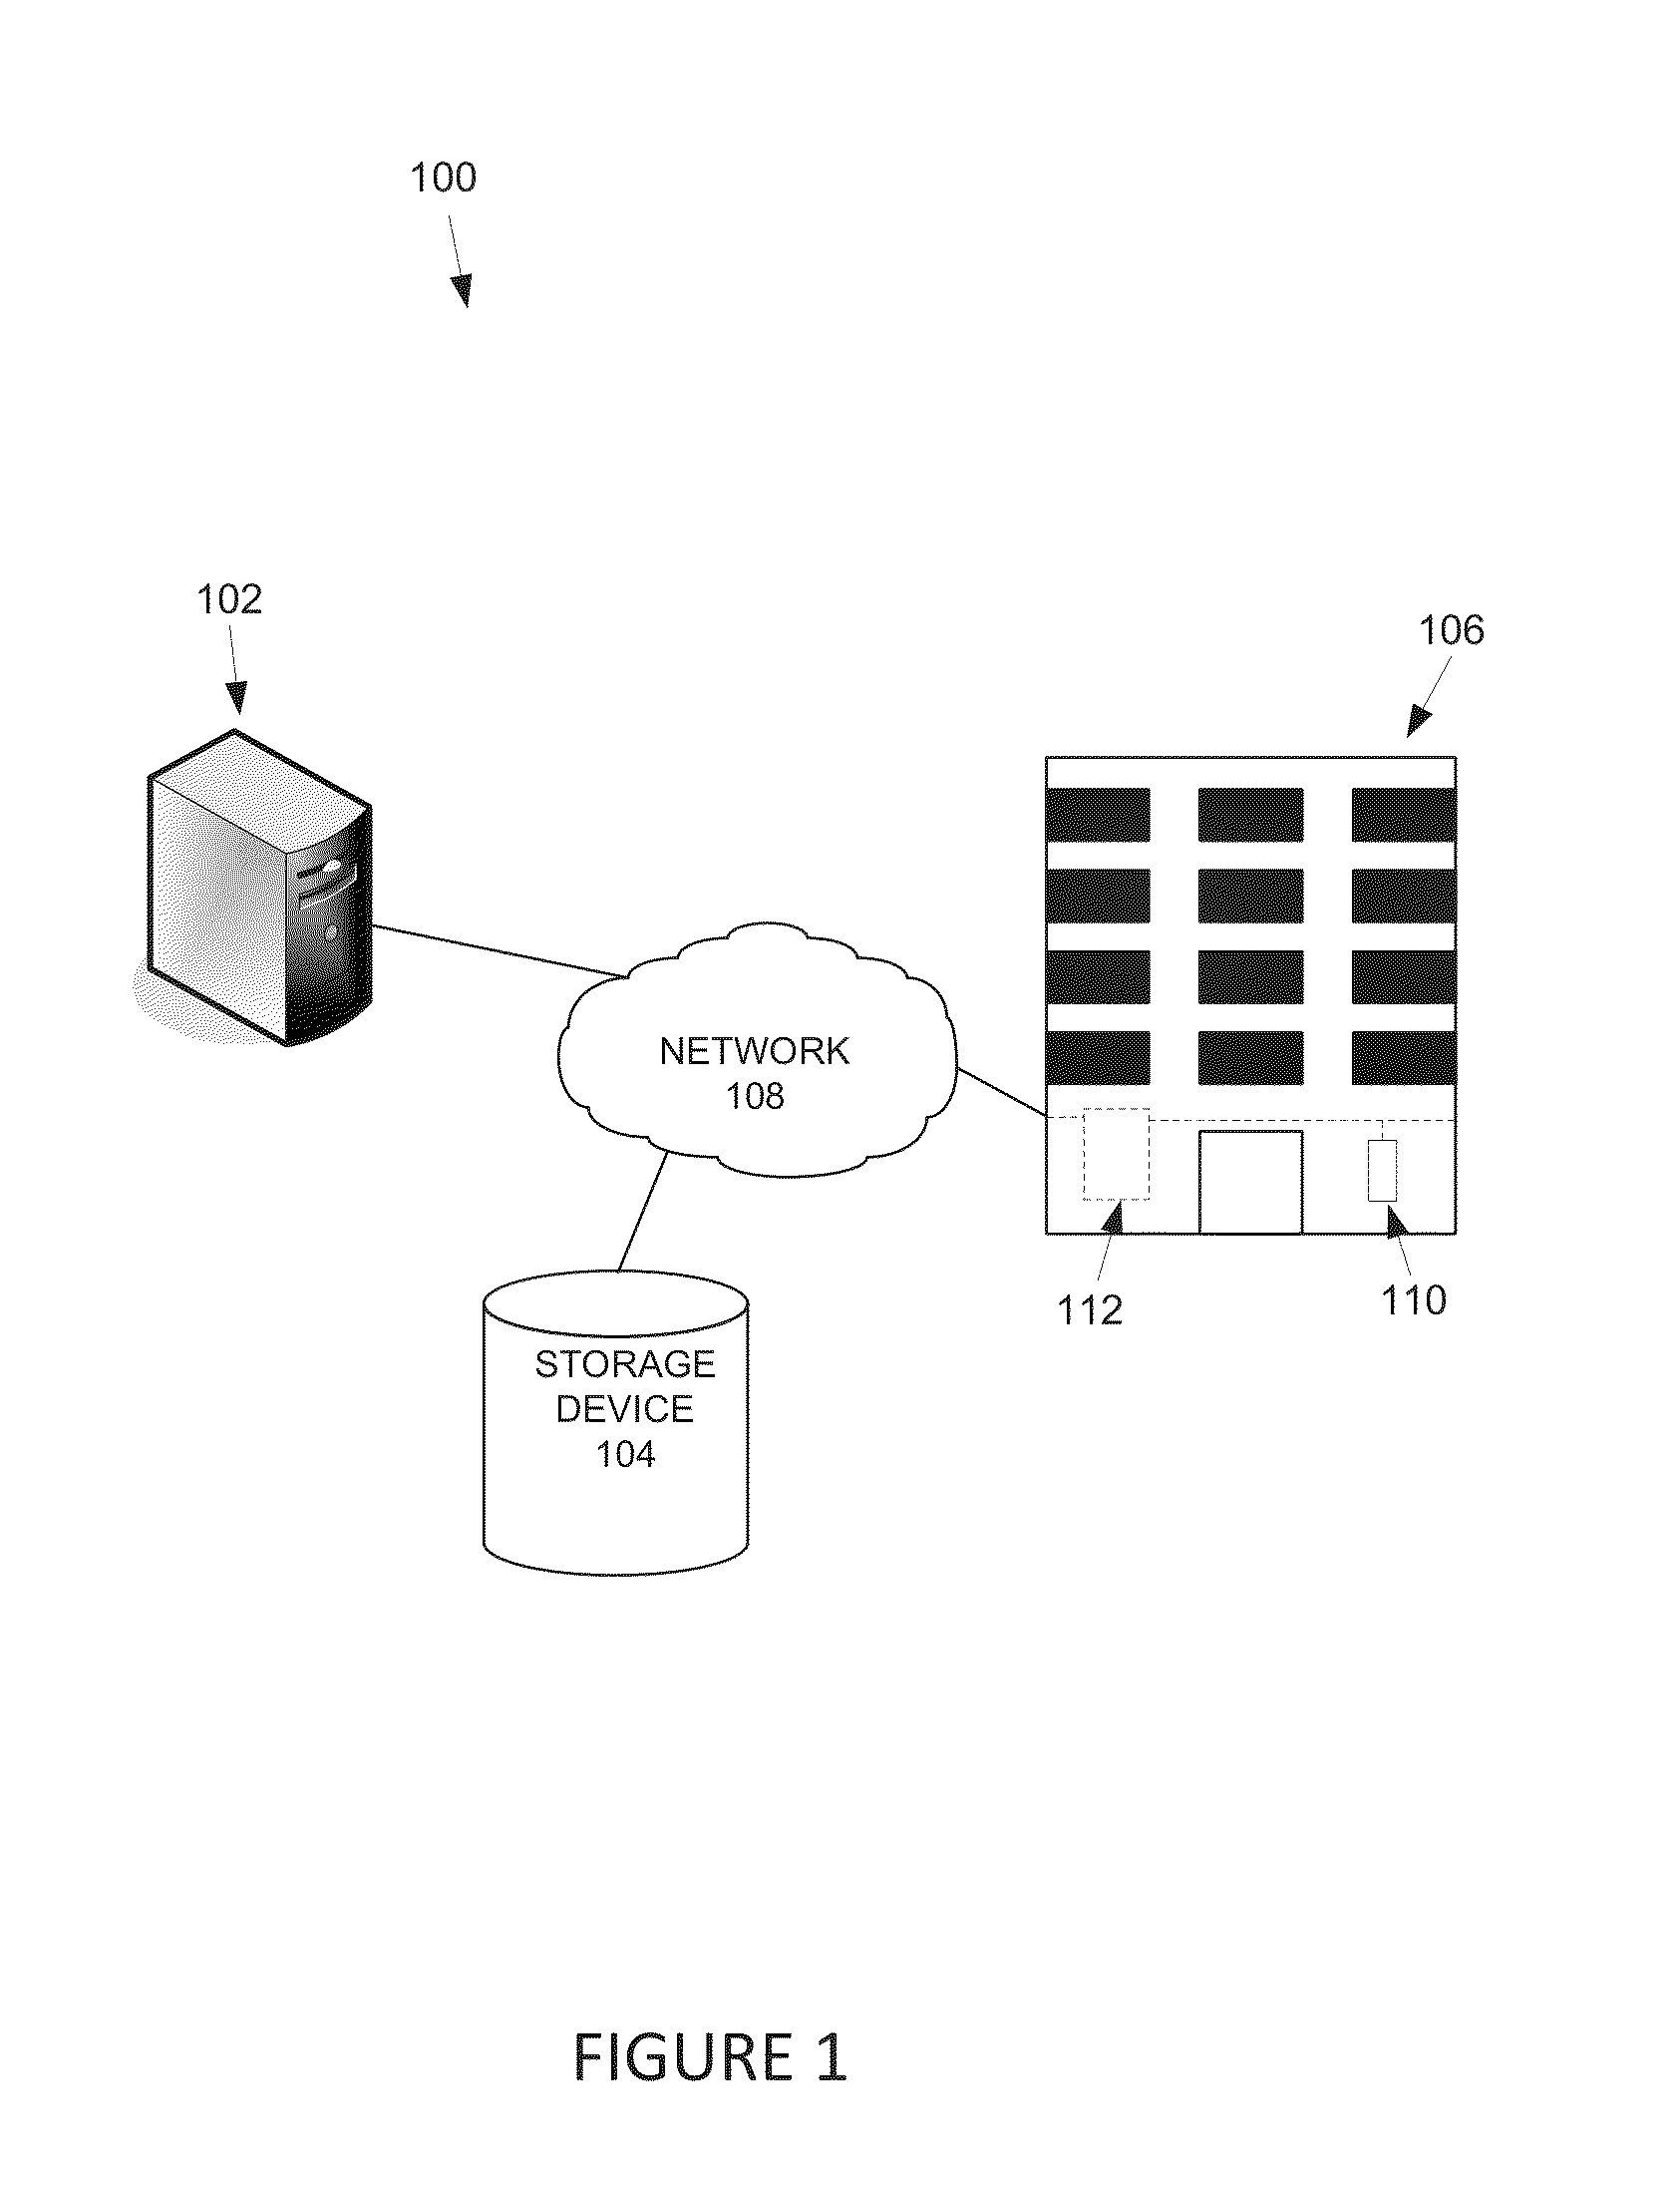 Methods and systems for generating a business process control chart for monitoring building processes